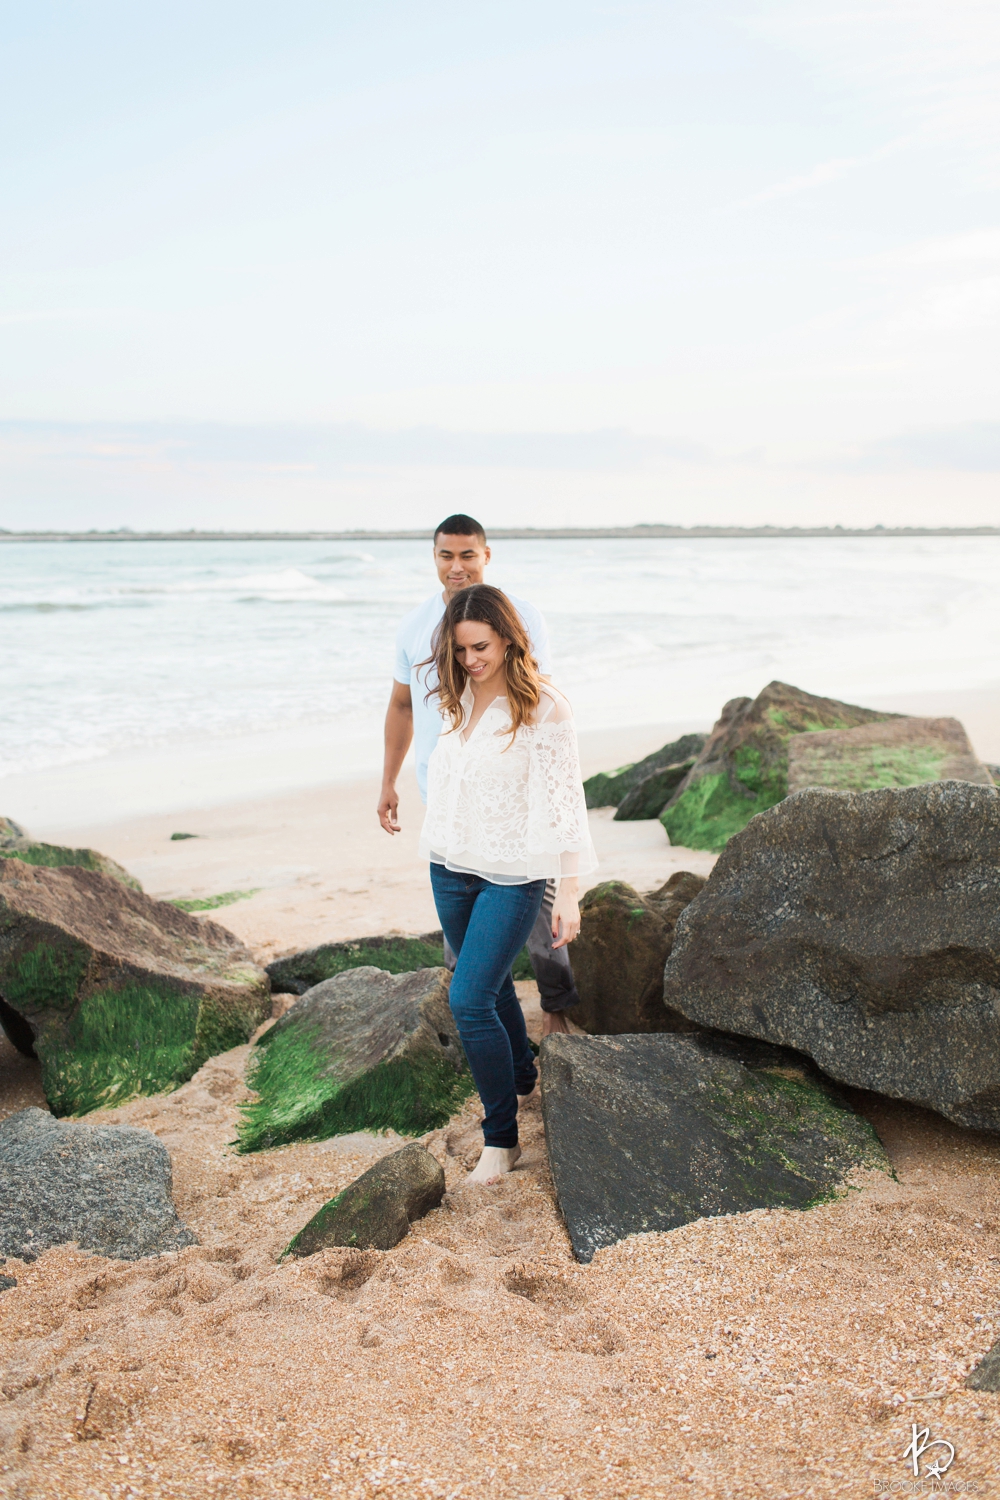 St. Augustine Wedding Photographers, Brooke Images, Katie and Ron's Engagement Session, Beach Session, Downtown St. Augustine